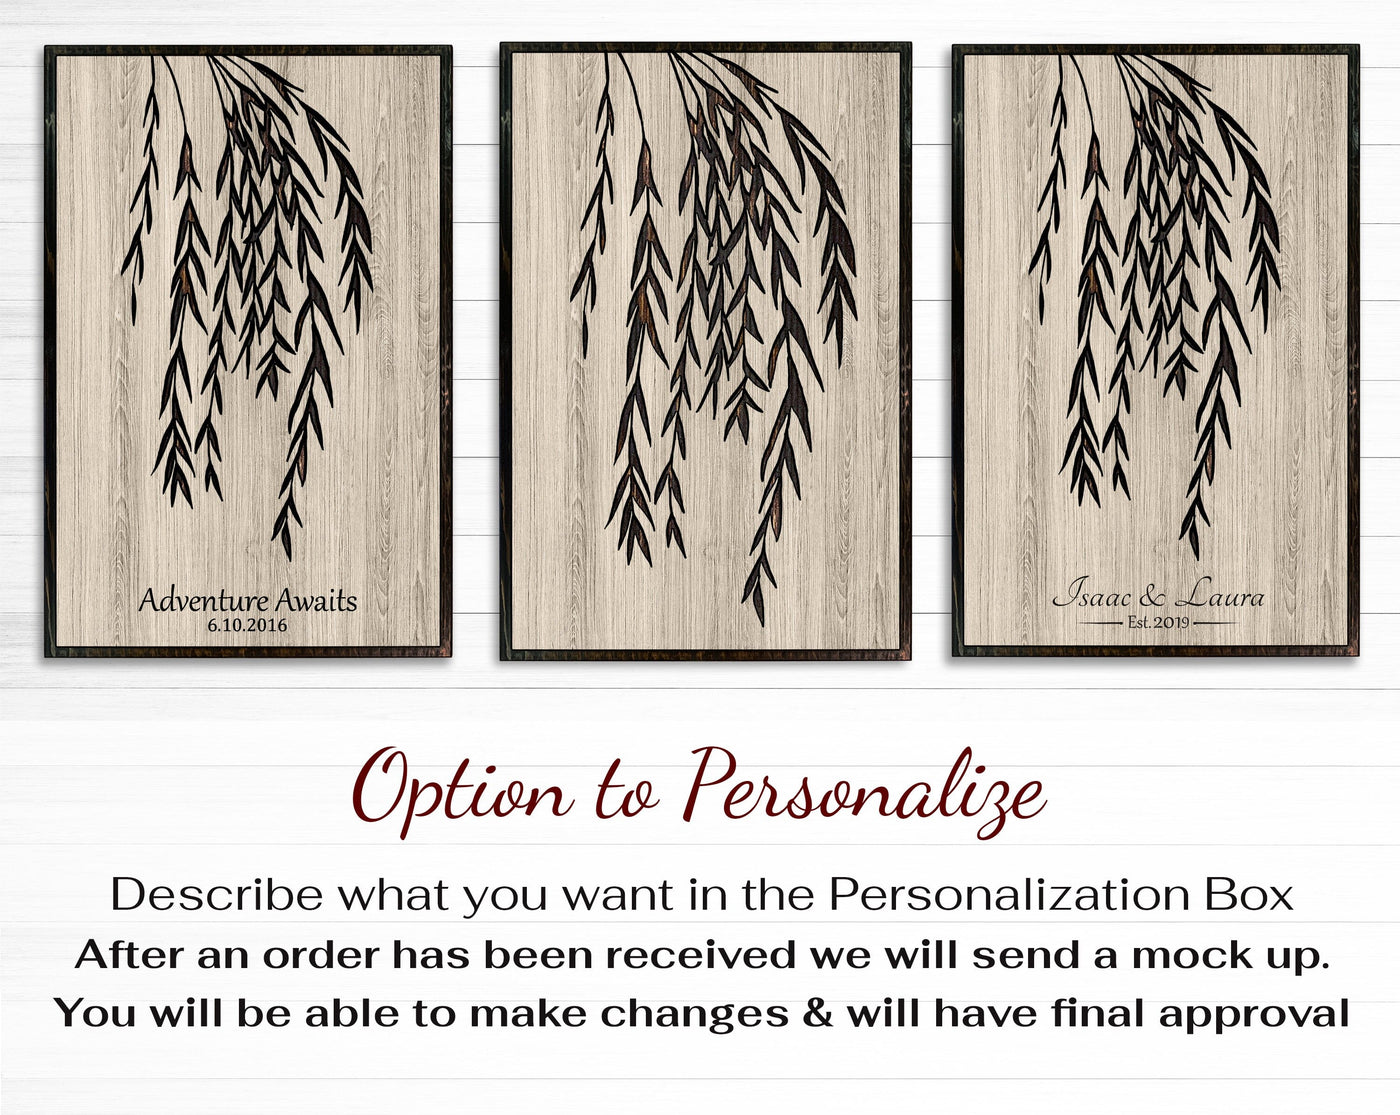 Custom Willow Tree Wood Wall Art: Handcrafted with precision, this stunning wood wall art features a beautifully carved willow tree design. Personalize with names, dates, or a special message for a heartfelt touch. A perfect addition to any room's decor, bringing the charm of nature and the warmth of personalization together.